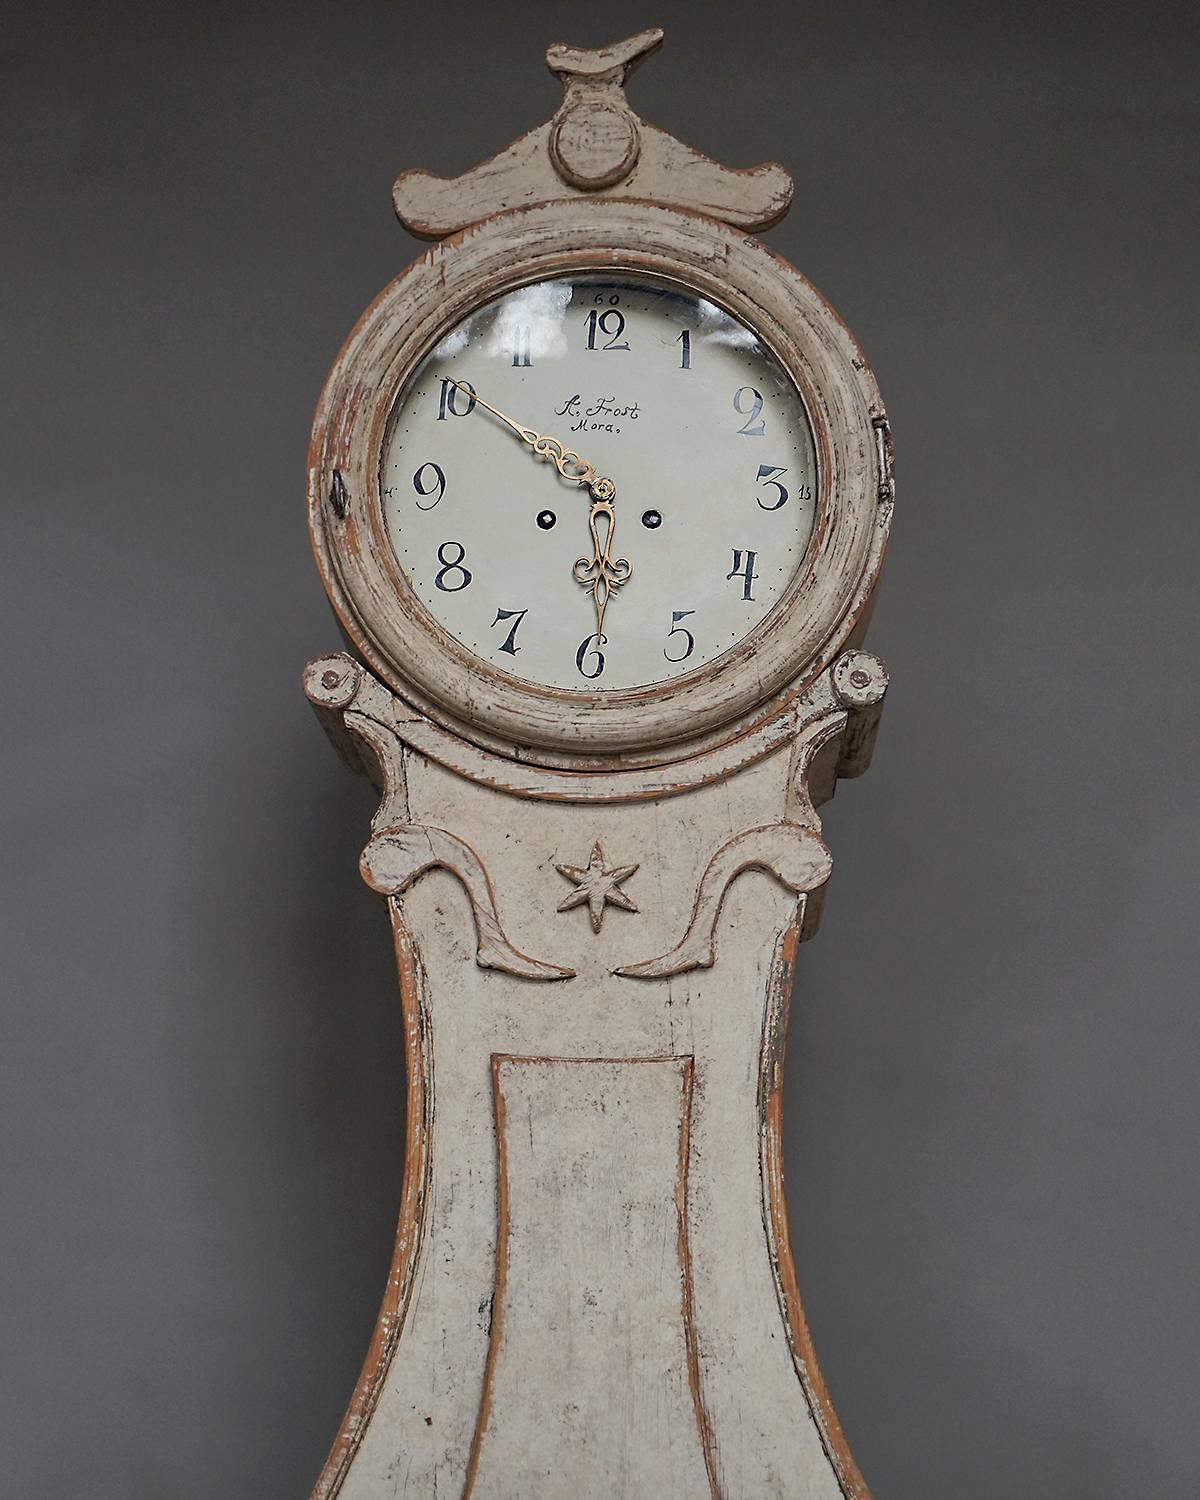 Early Mora clock in hand-carved case from the Fryksdal region, Sweden, circa 1820. This beautiful clock has a Primitive bird carving at the top, and carving on the “neck” and below the “belly” reminiscent of the traditional Swedish bride’s costume.